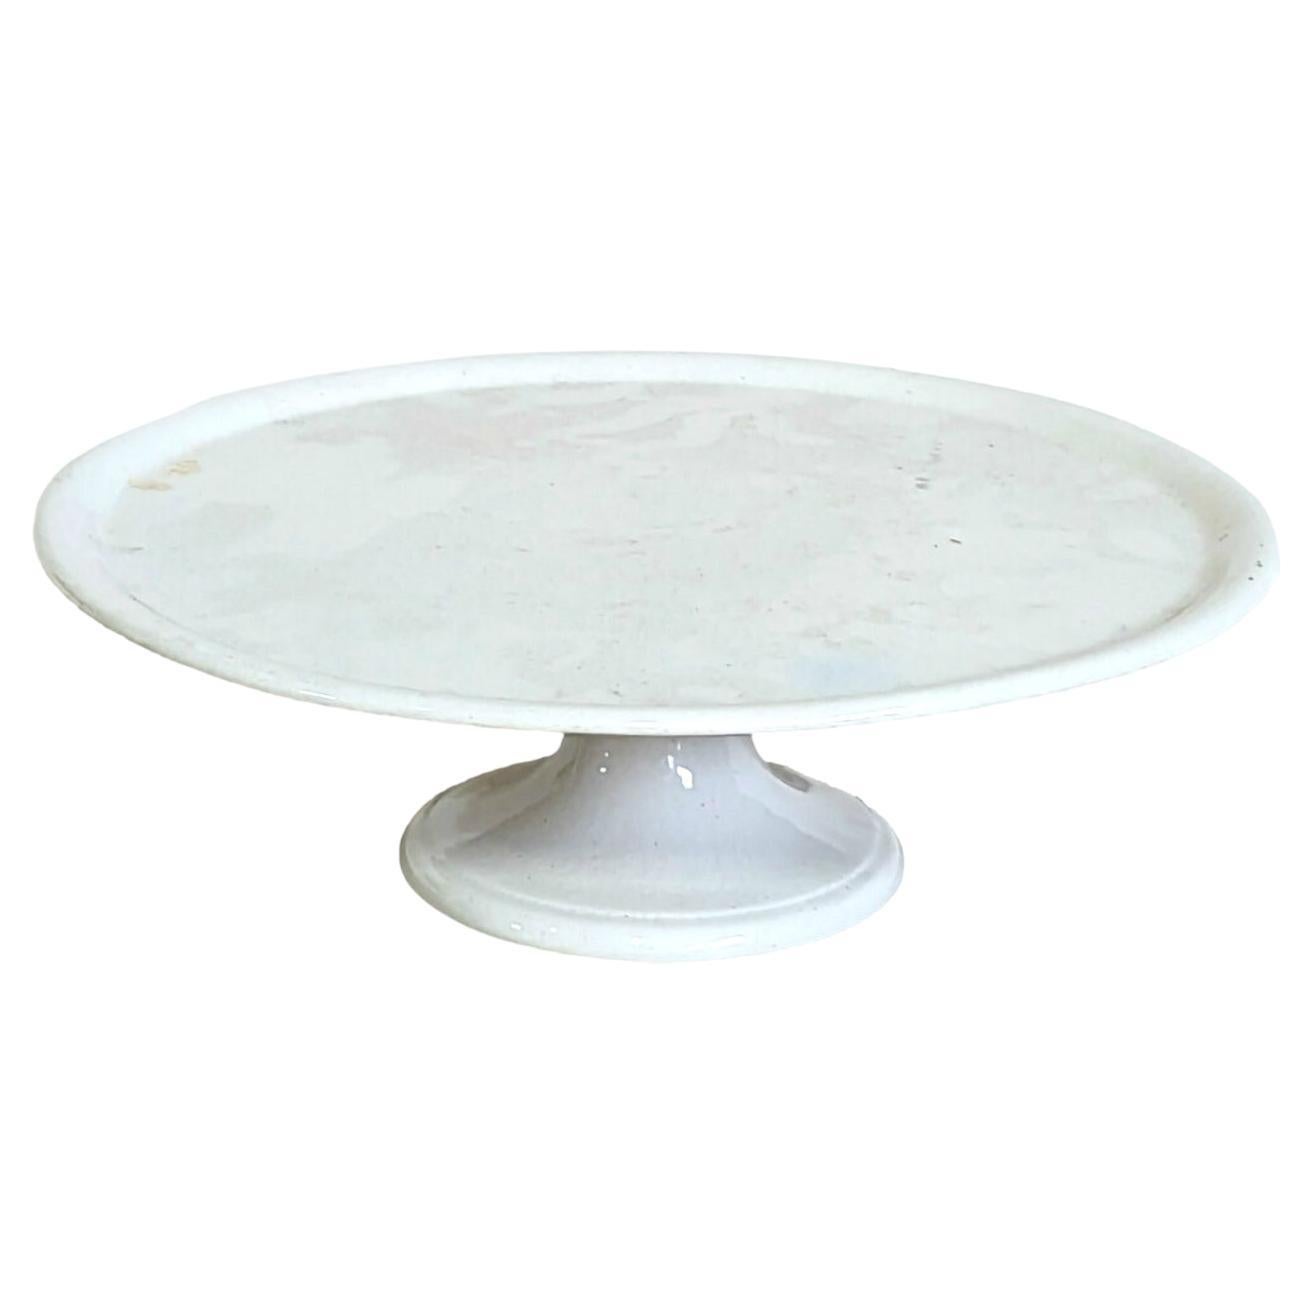 19th Century Antique Dutch White Ironstone Pedestal Cake Stand For Sale